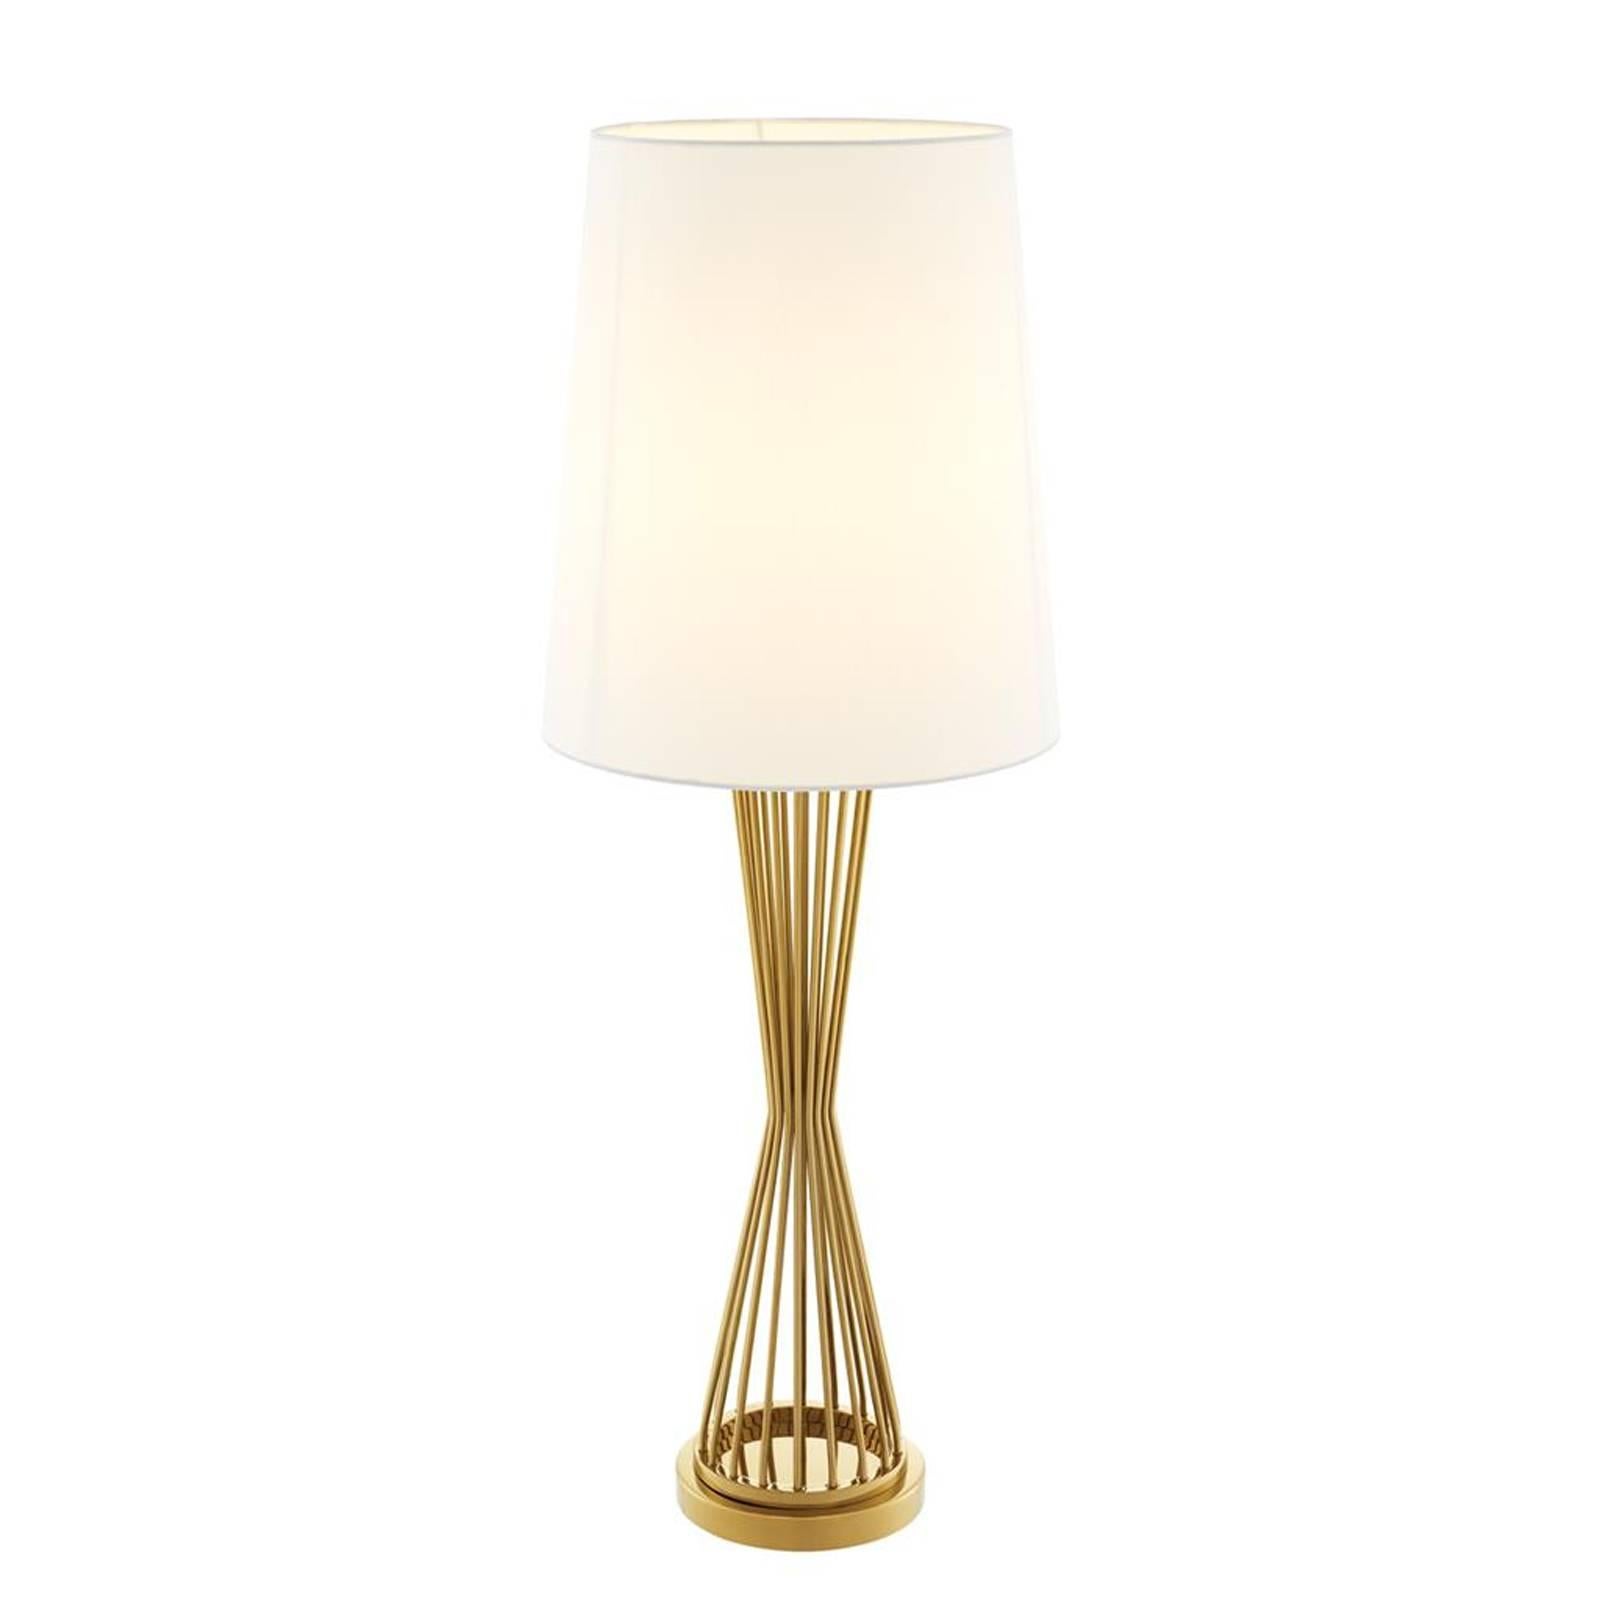 Table lamp Barnet with base in gold finish.
Off-white shade included. One bulb, lamp holder
type E27, max 40 watt. Bulb not included.
Also available in nickel finish.
Also available in floor lamp Barnet.
 